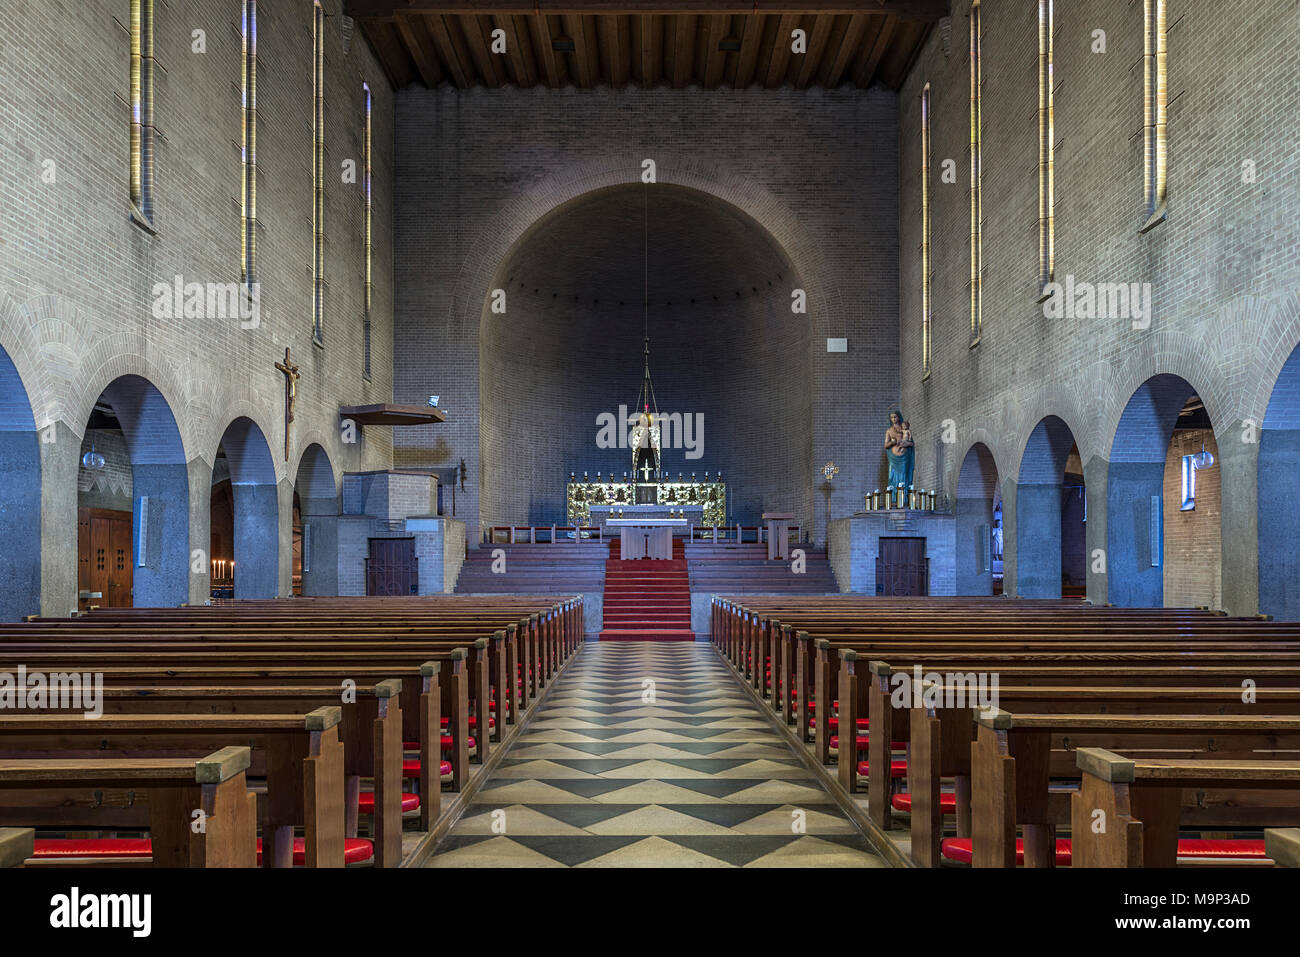 Interior, St. Bonifaz church, expressionist architecture, built in 1928, Erlangen, Middle Franconia, Bavaria, Germany Stock Photo